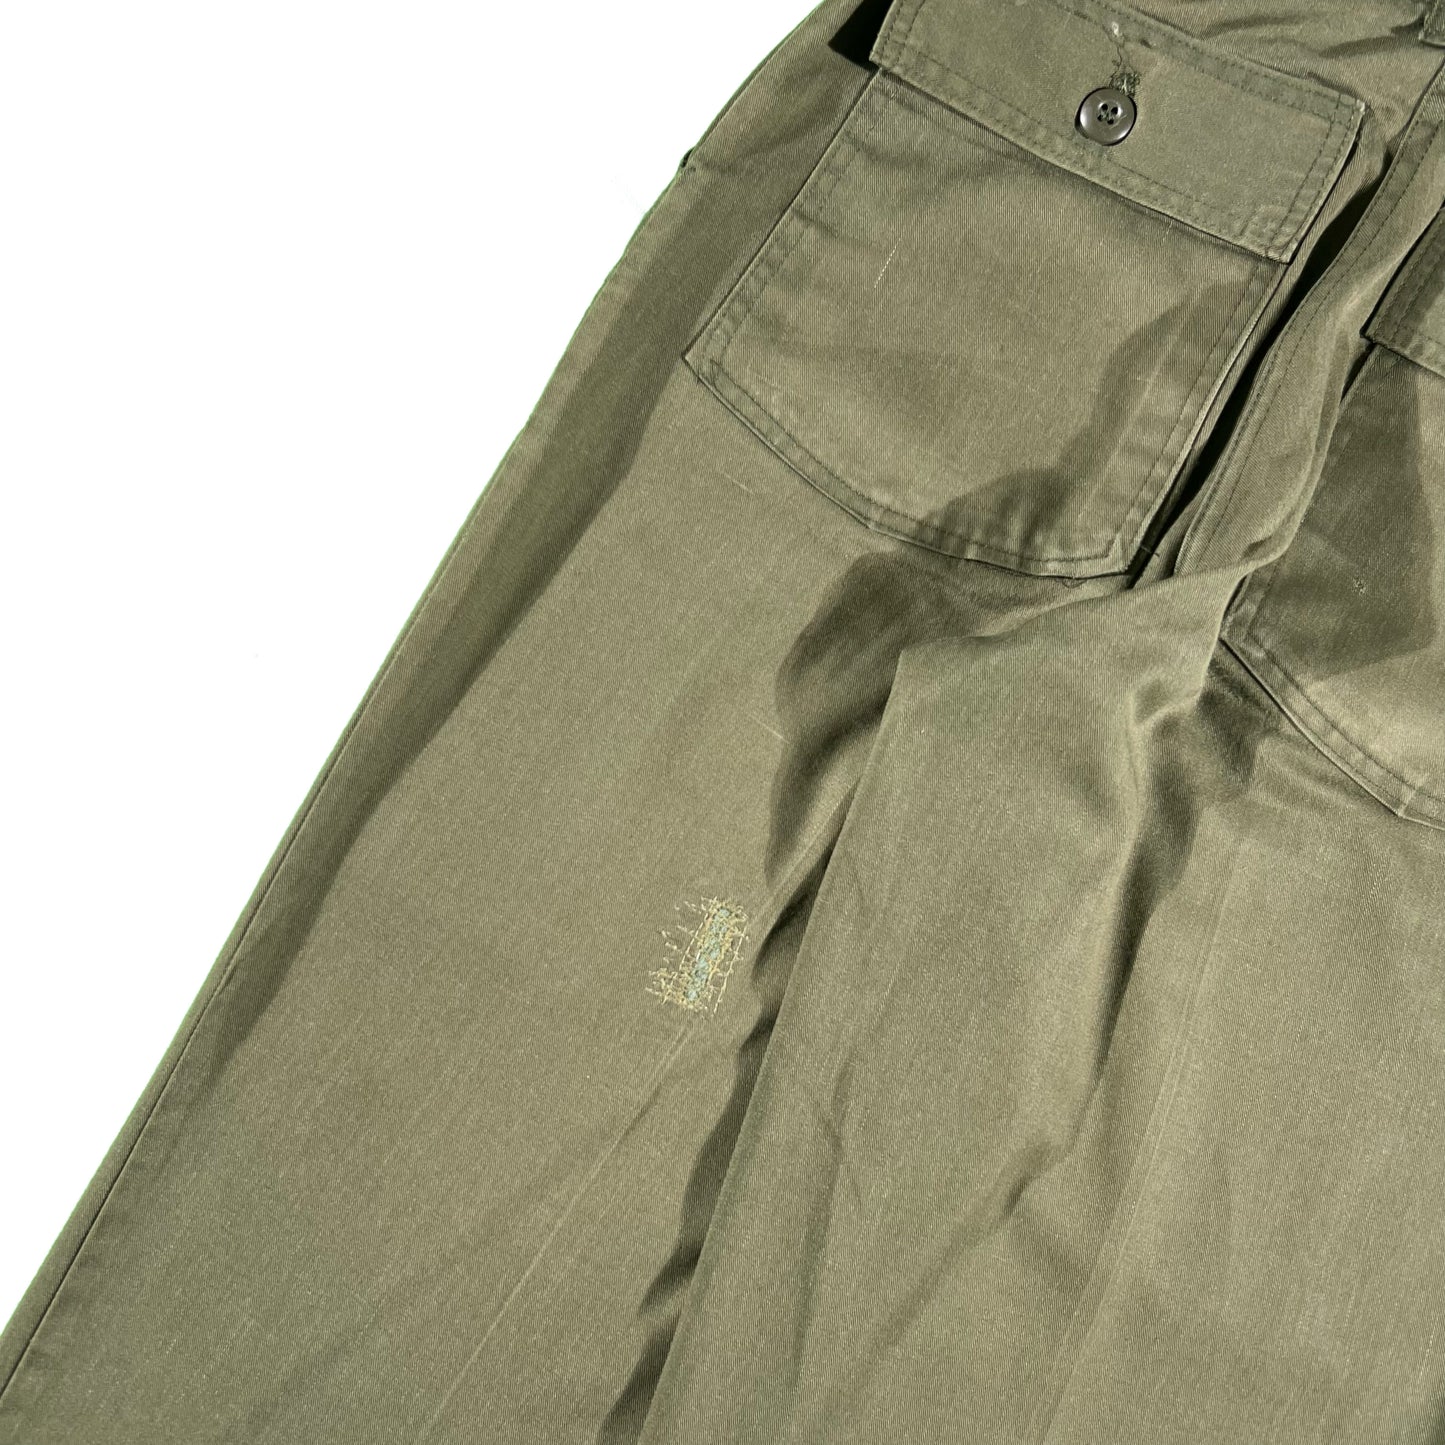 70s OG 507 Army Trousers- 26x28